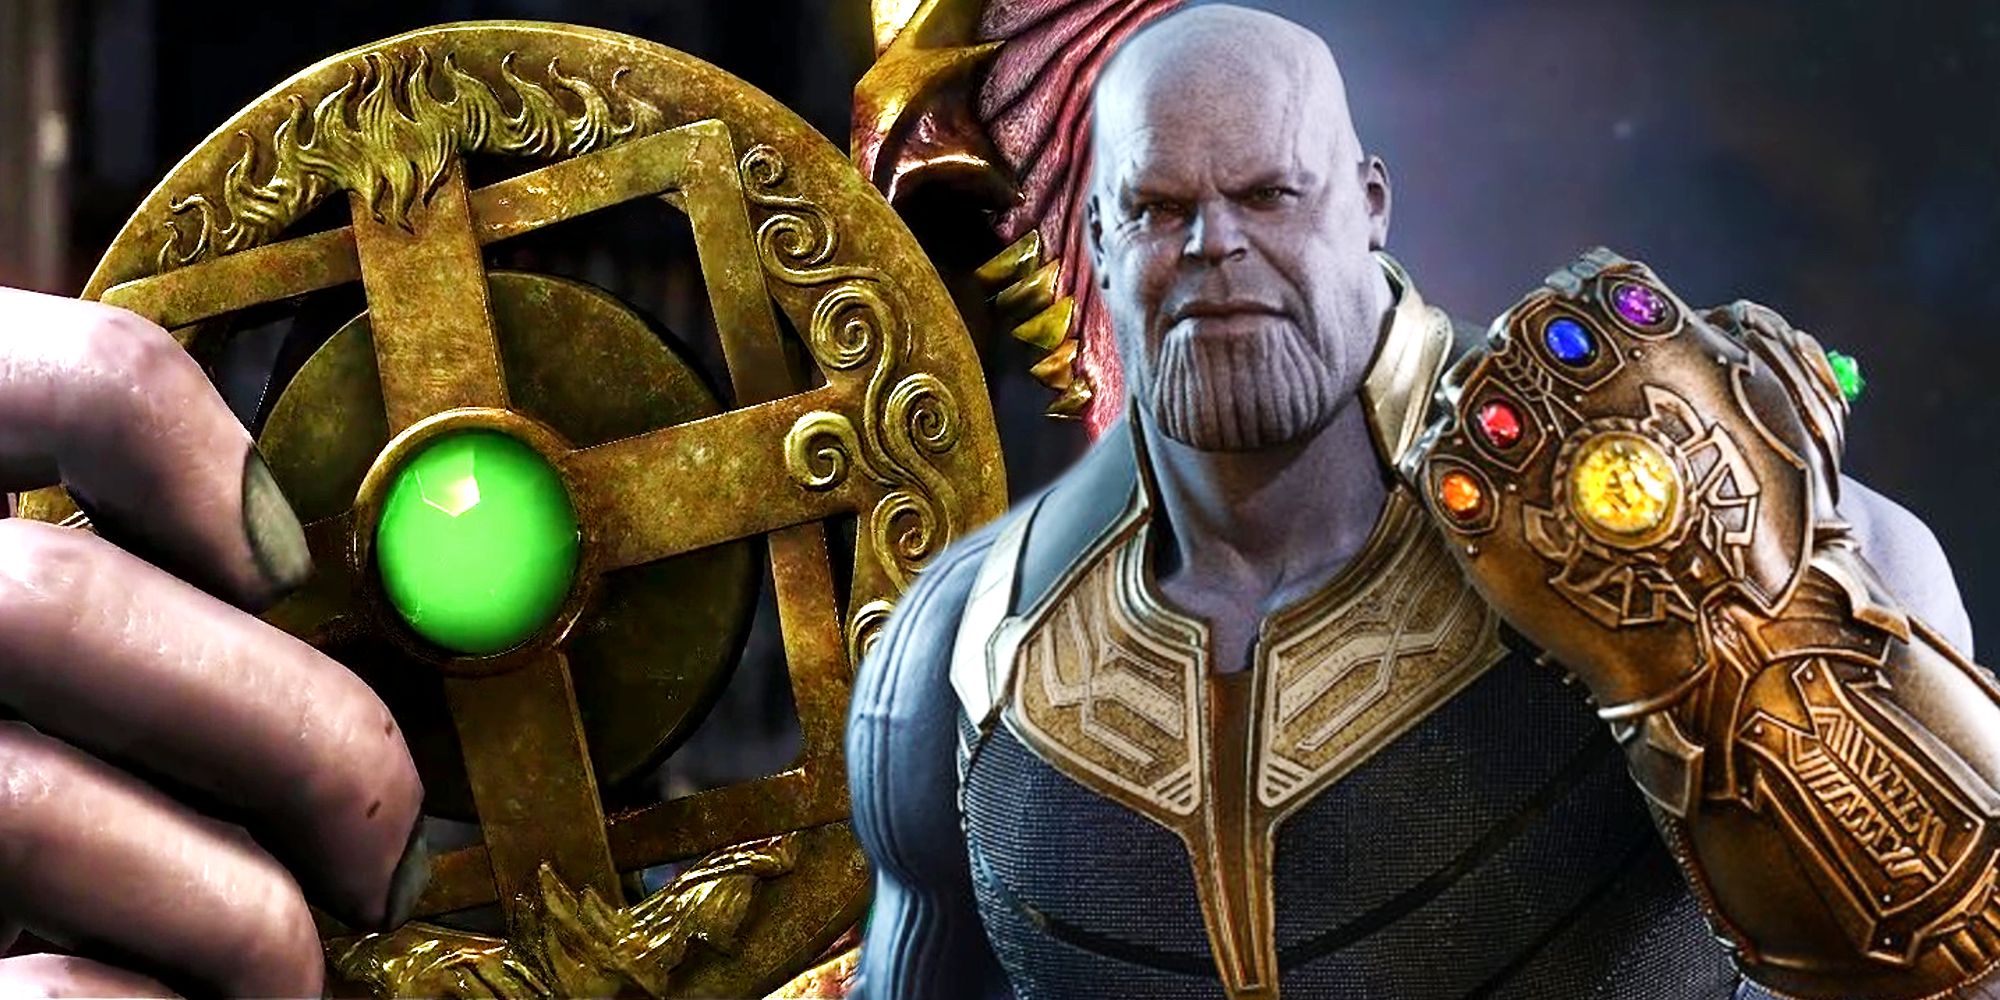 Mortal Kombat's Amulet of Shinnok and Thanos with the Infinity Gauntlet in the MCU